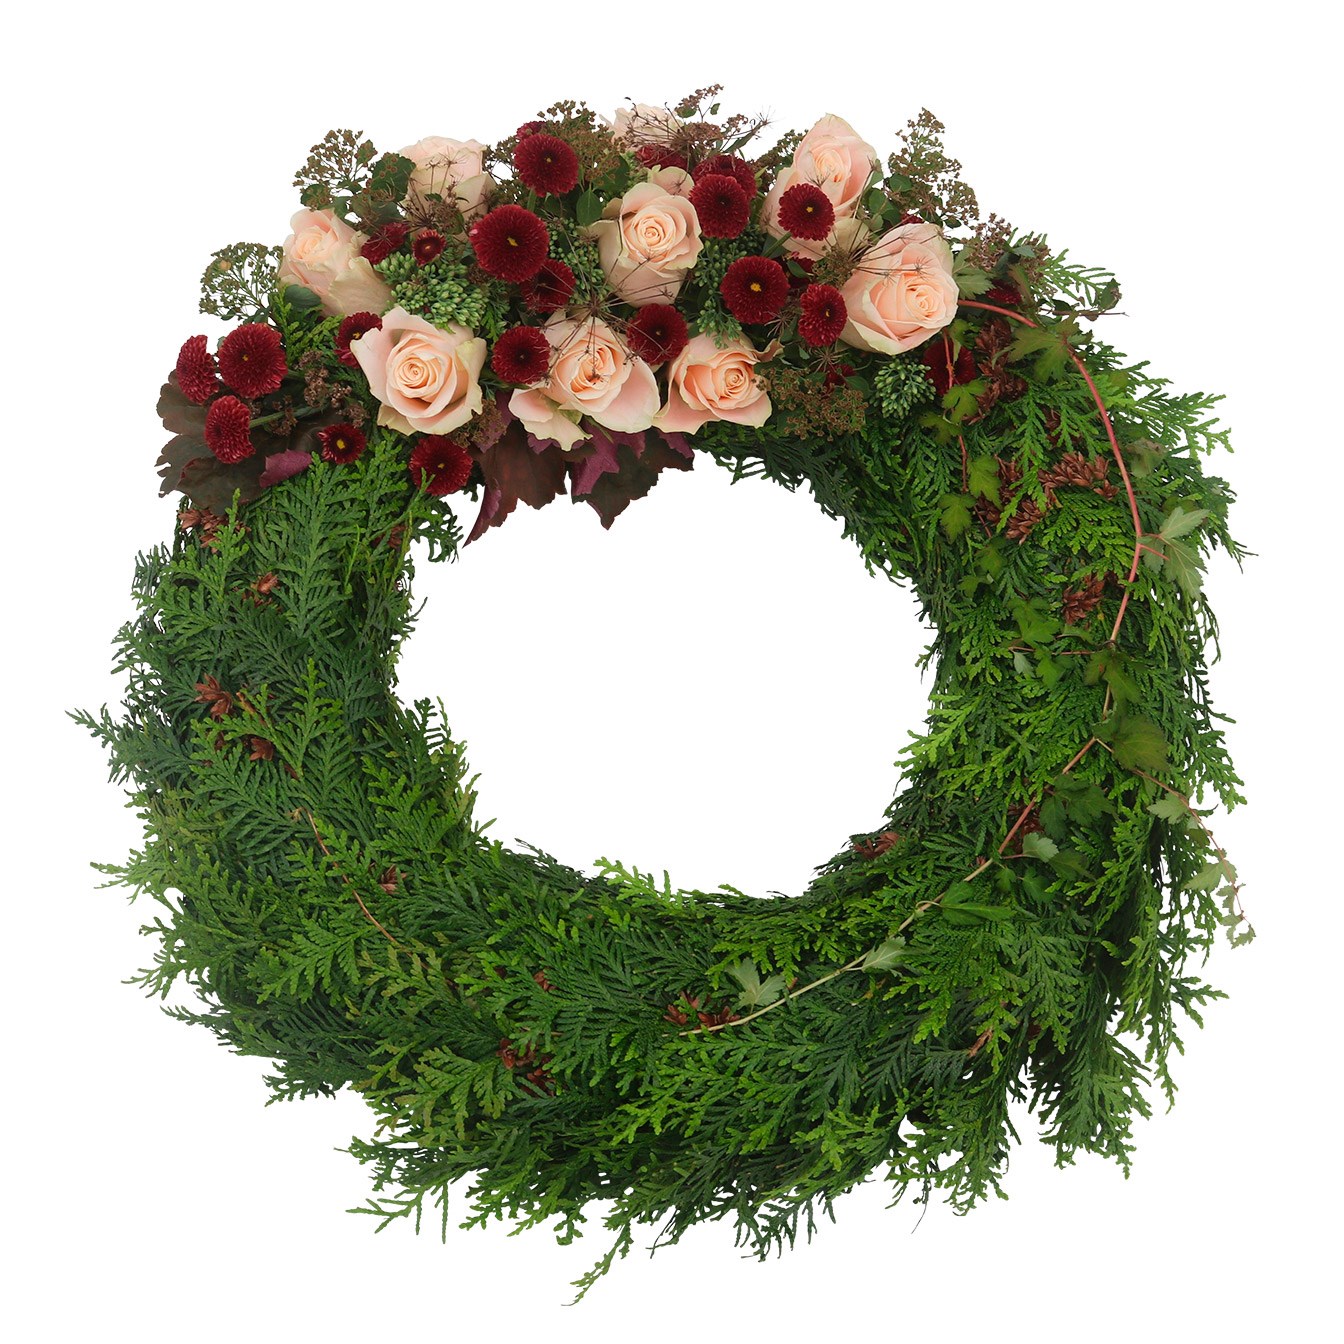 Rest in peace -funeral wreath